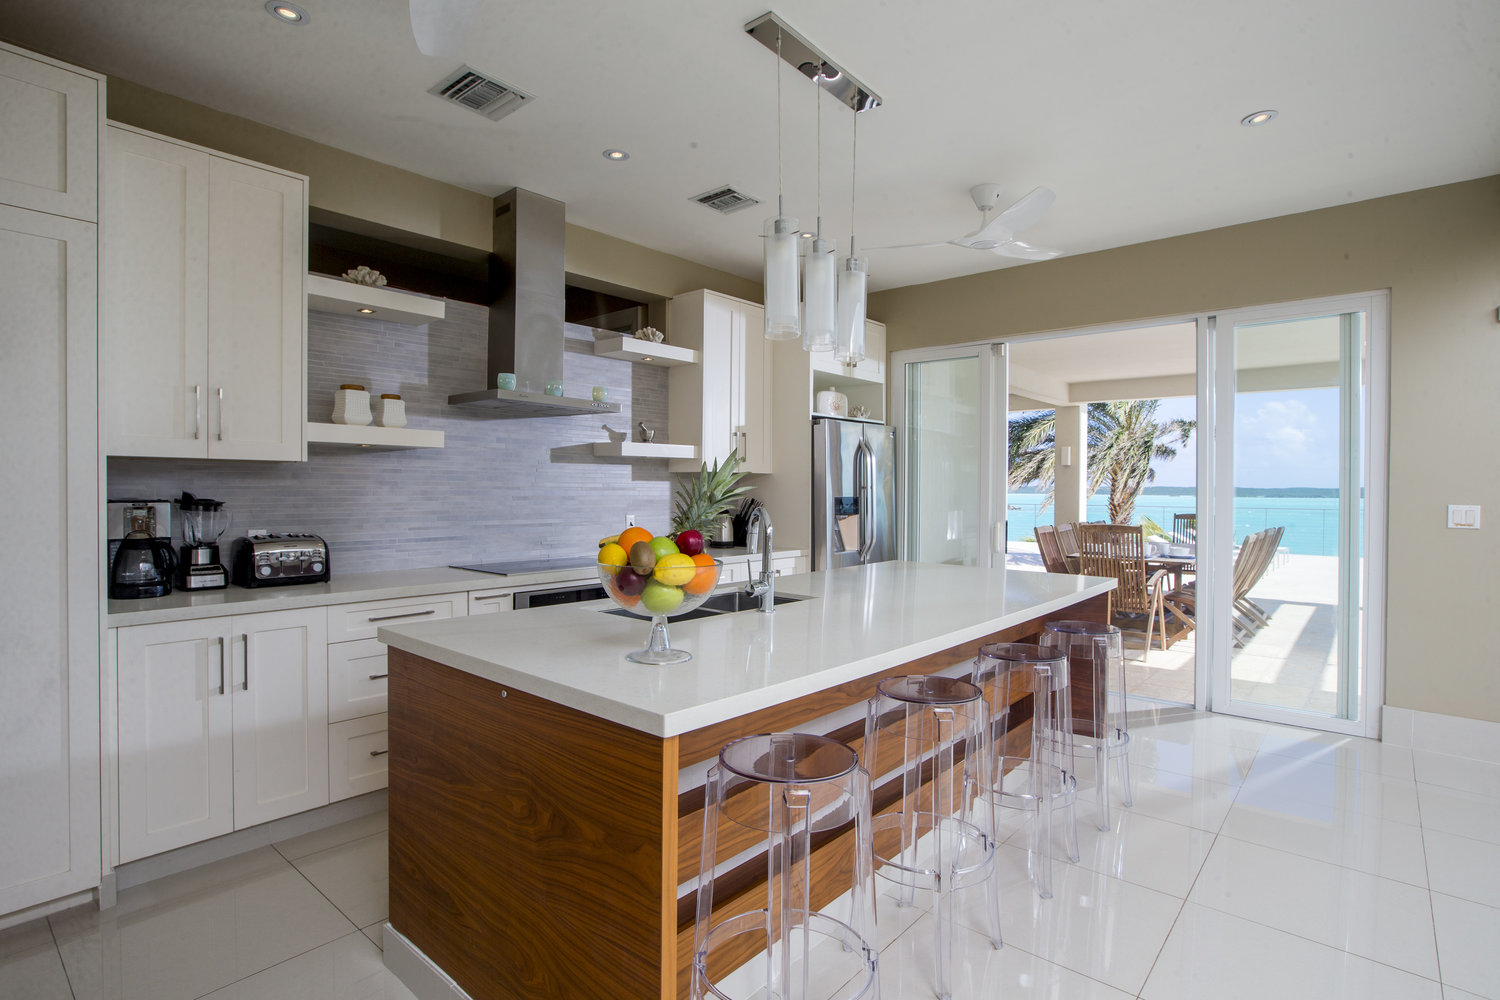 Open white kitchen leading to outdoor dining area.